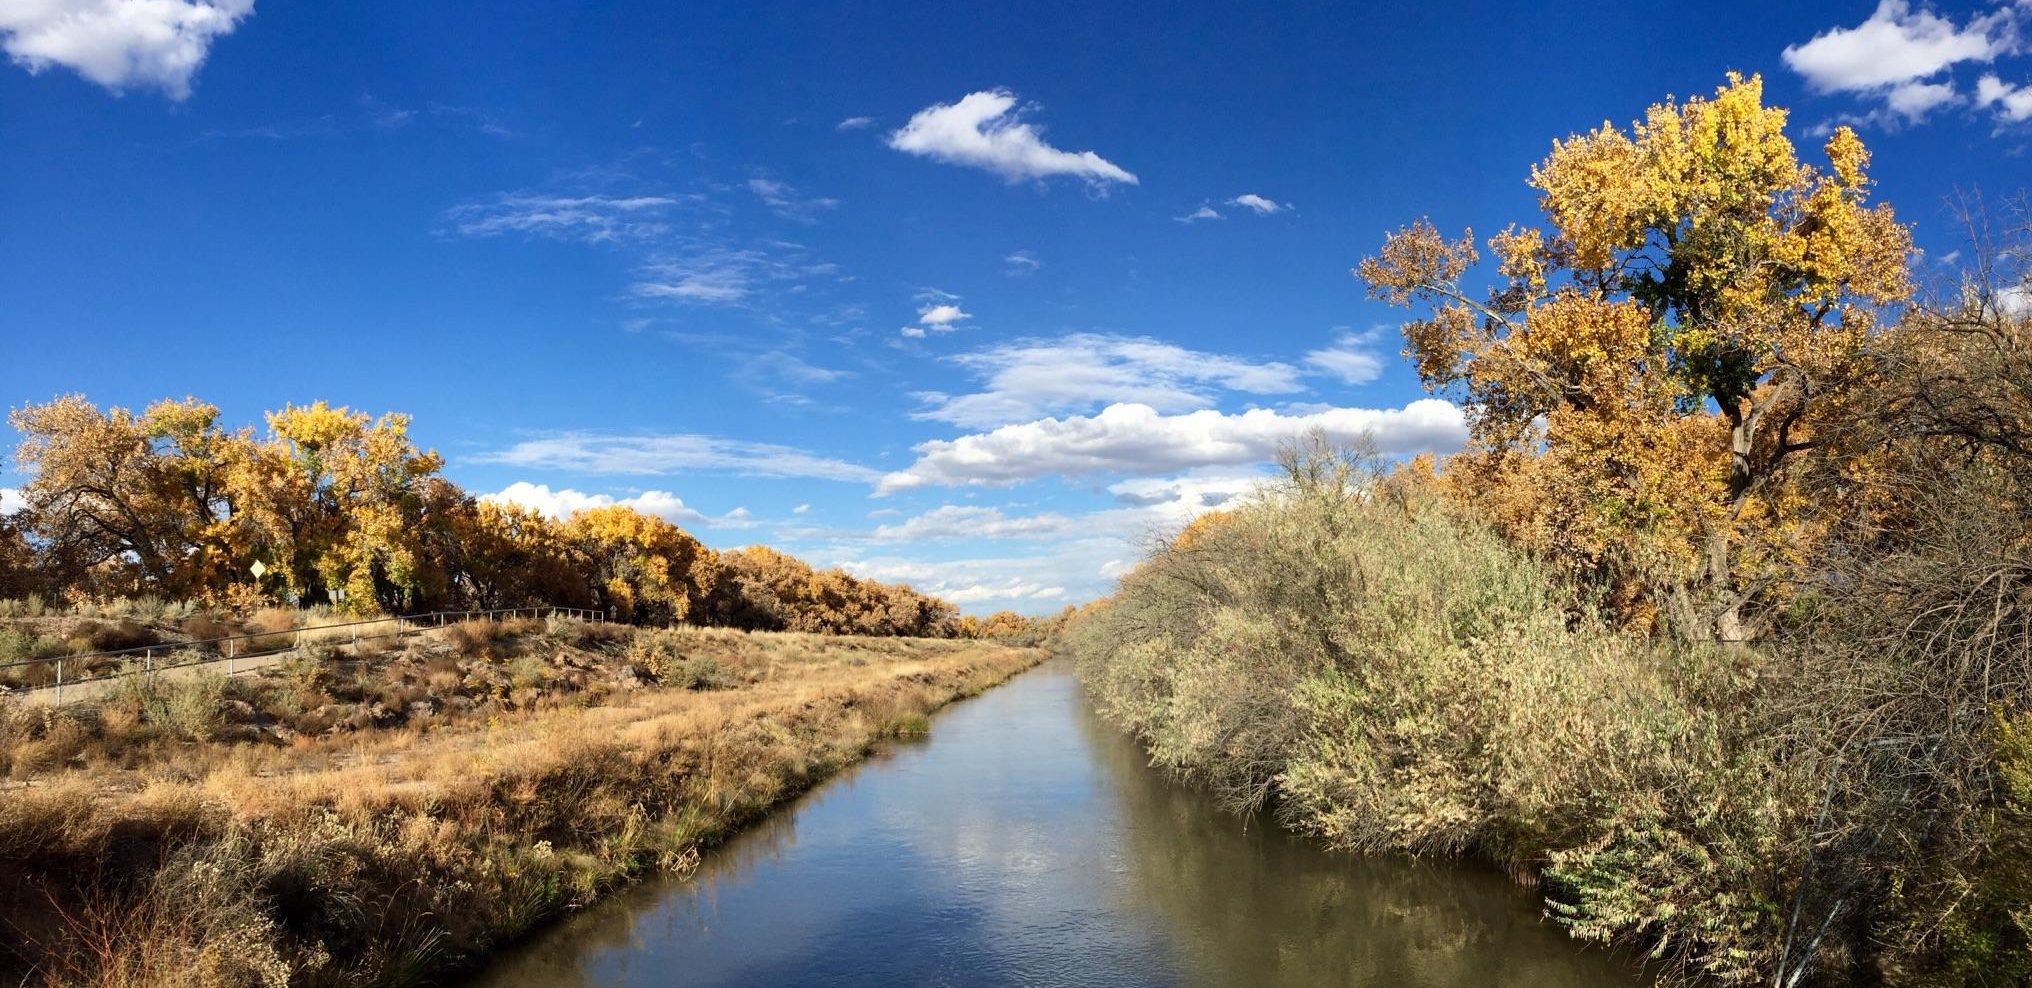 River in New Mexico